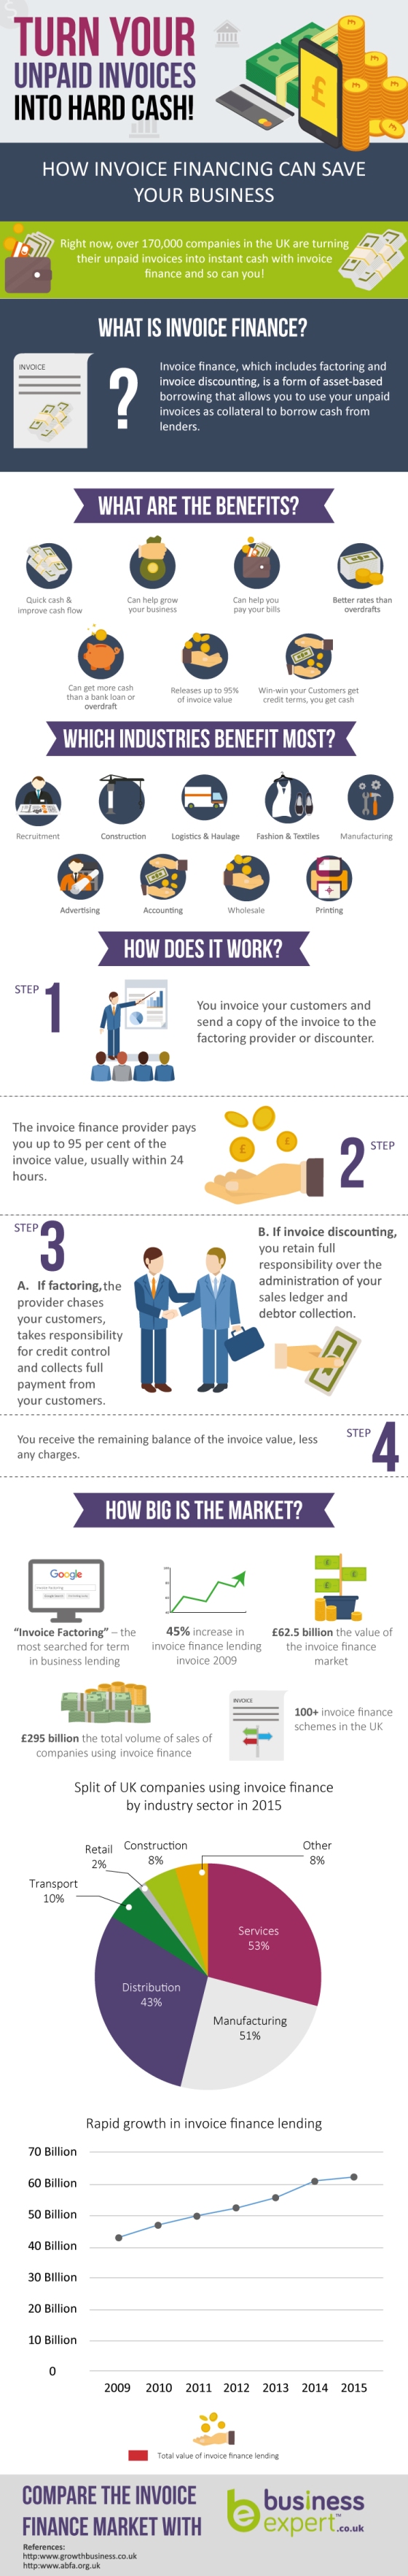 Infographic : How Invoice Financing Can Save Your Business